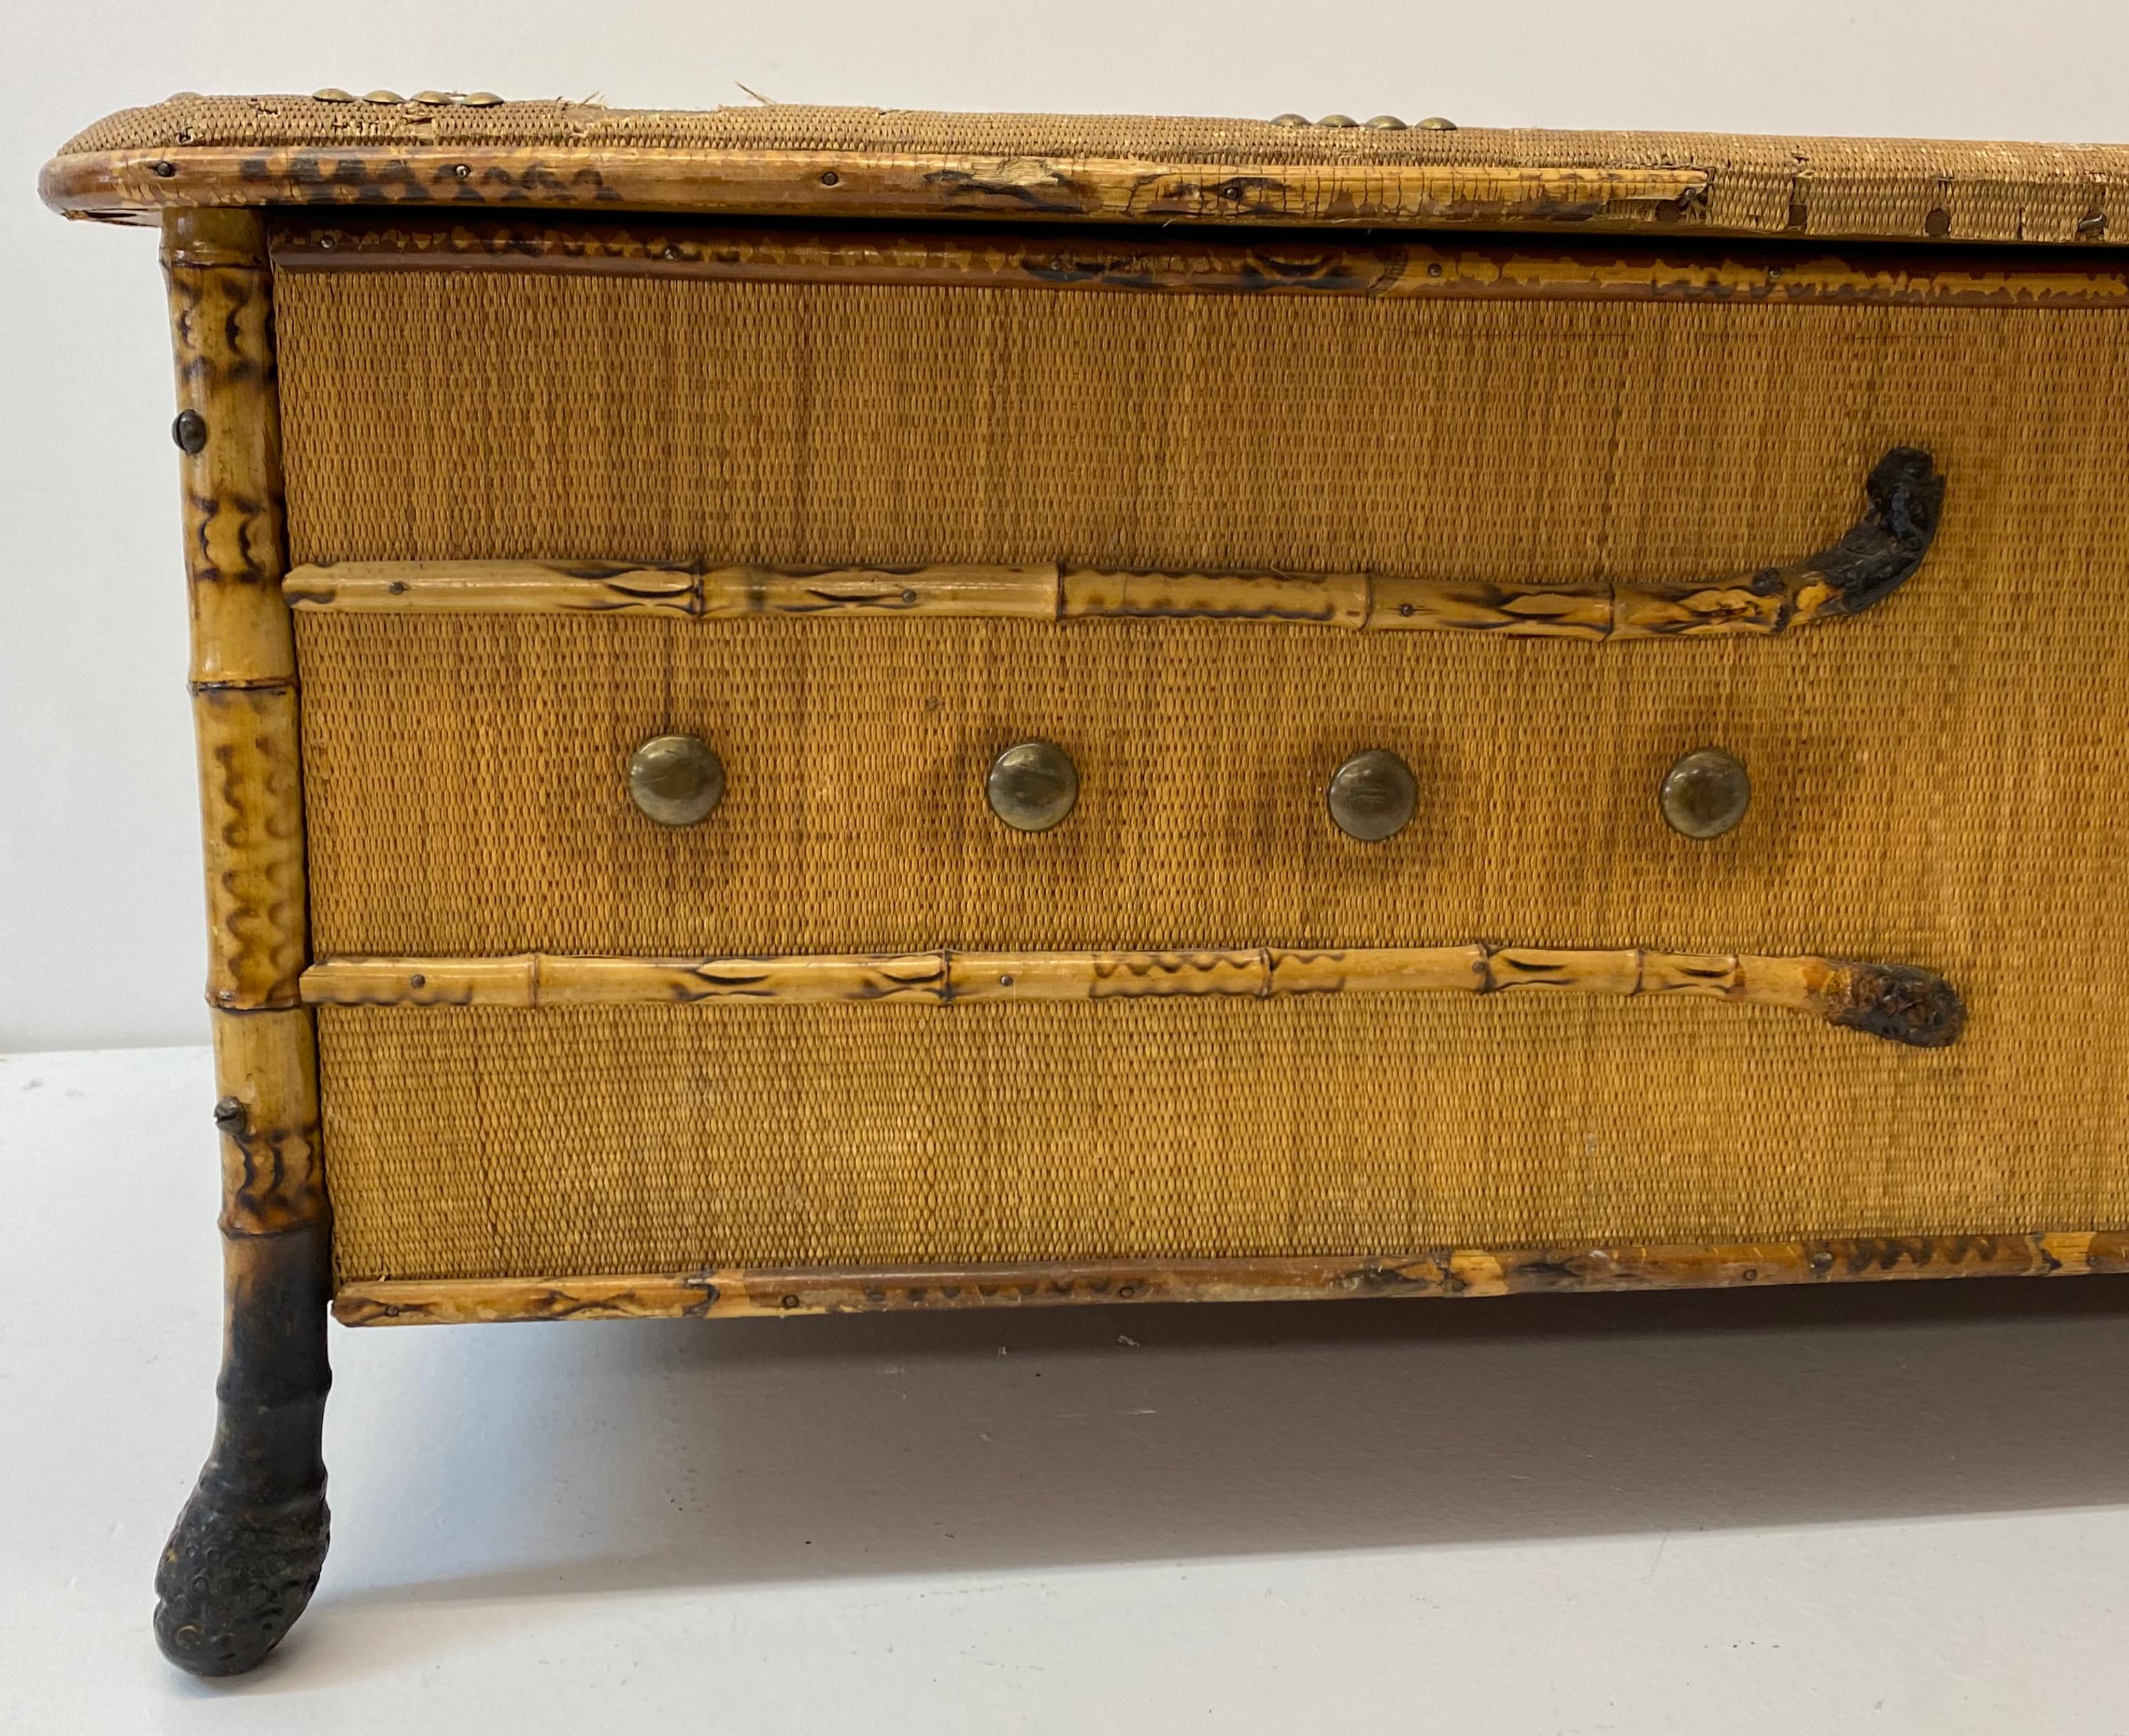 19th century bamboo & rattan blanket / games trunk

Fine old chest, or trunk made with bamboo and rattan

The rattan shows some distress (please see all images) This is consistent with pieces of this age.

Some brass tack decoration along the